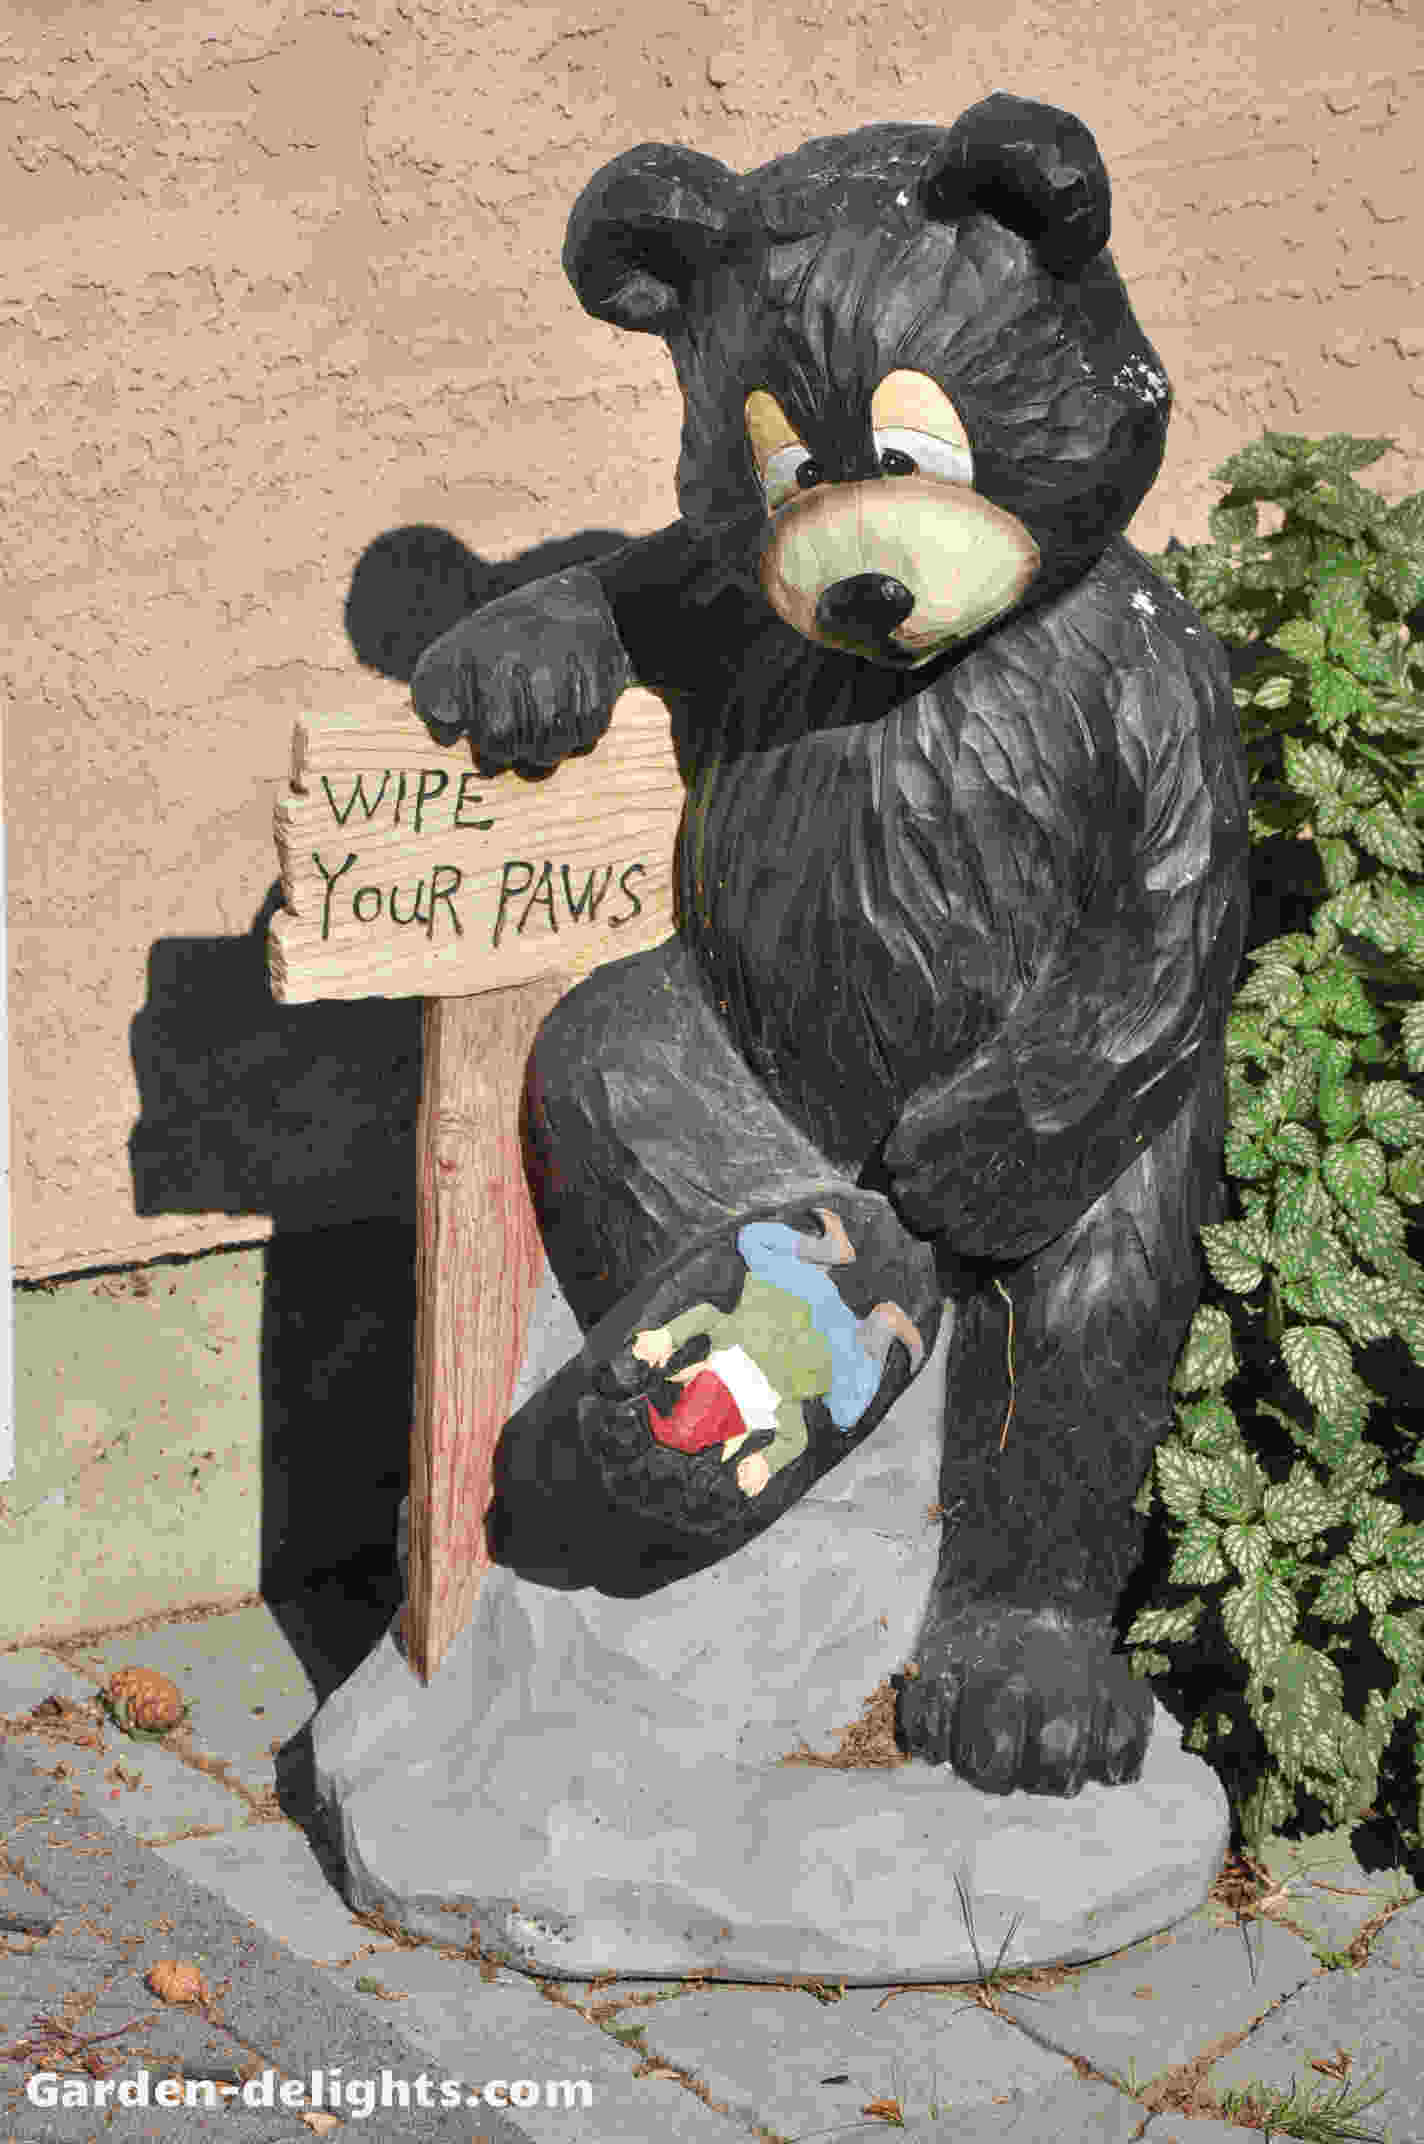  Bear garden statue with one foot up with garden gnome underneath his foot with a sign wipe your paws, outdoor wood bear statues, risen bear statues, black forest bear welcome statue, wipe your paws, bear garden, yard ornaments, garden sculptures, funny yard statues, unique ornaments.